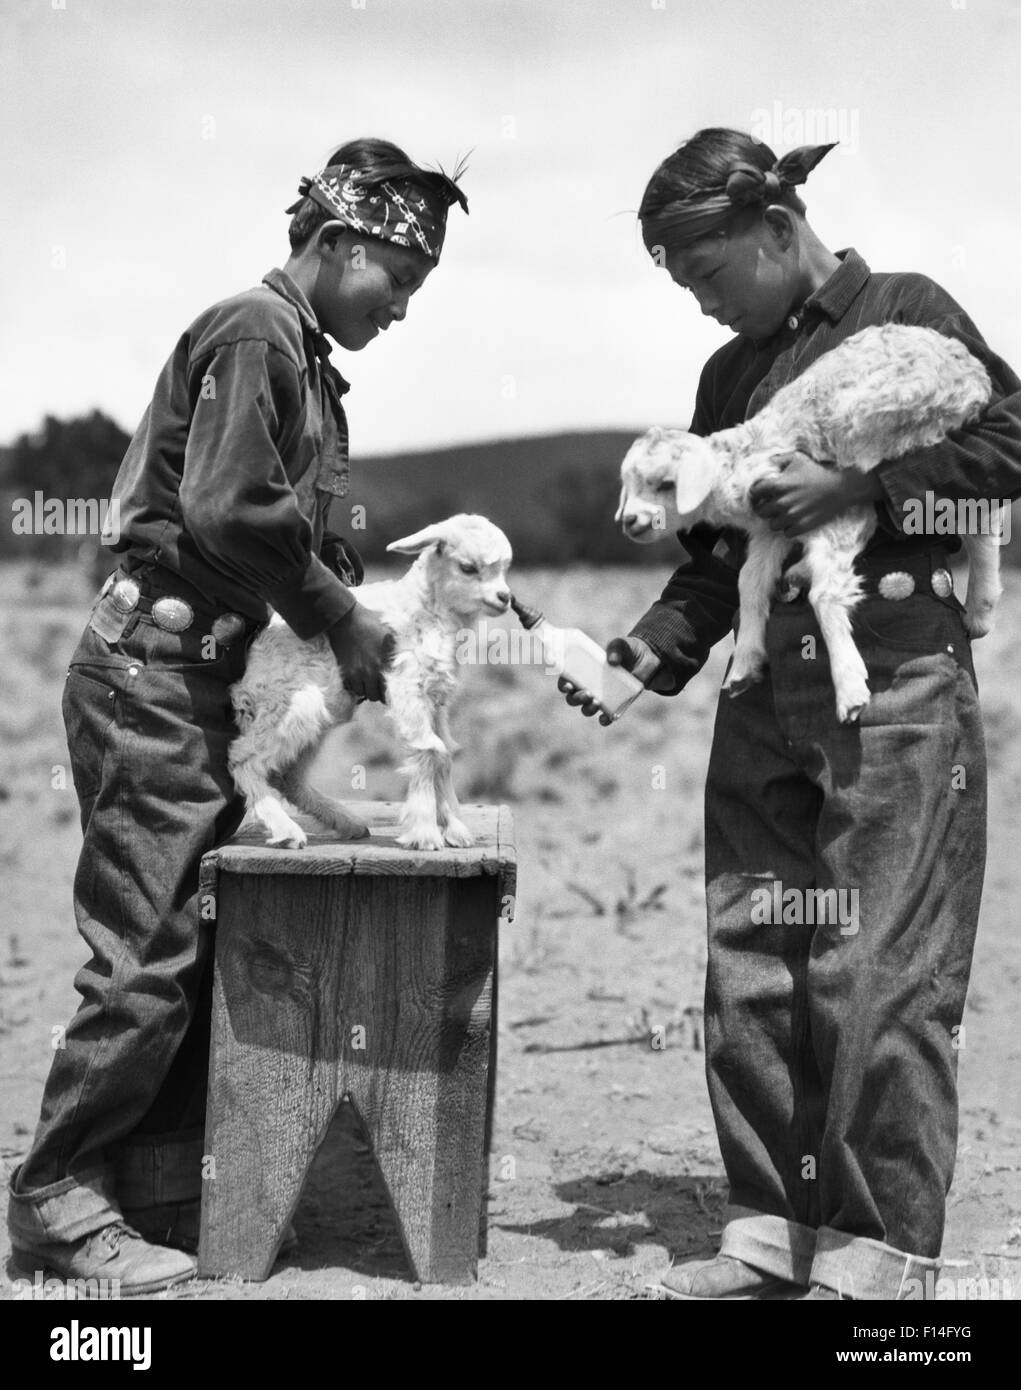 1920s TWO NATIVE AMERICAN INDIAN NAVAJO BOYS FEEDING LAMBS WITH MILK BOTTLE NEW MEXICO USA Stock Photo